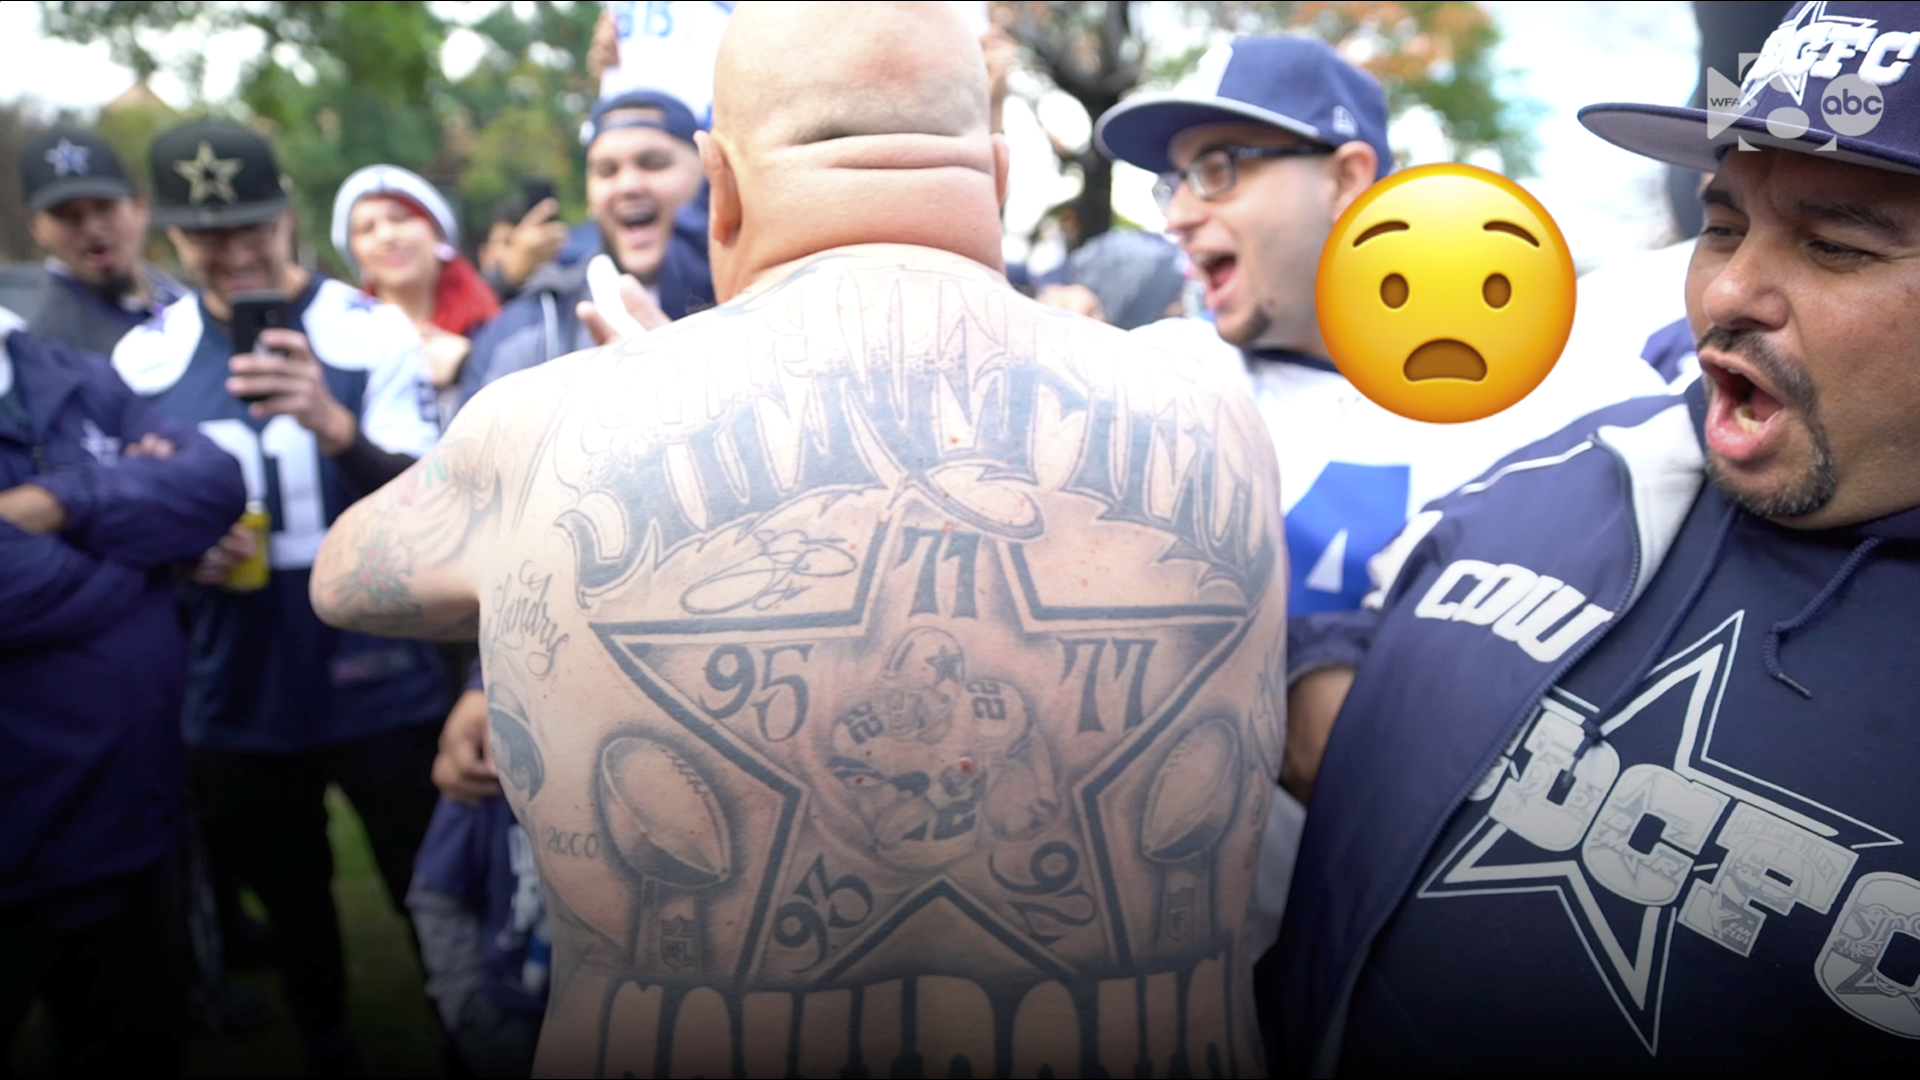 Just outside LA Memorial Coliseum, 1,200 miles away from Dallas, there was a village full of rowdy Cowboys fans.